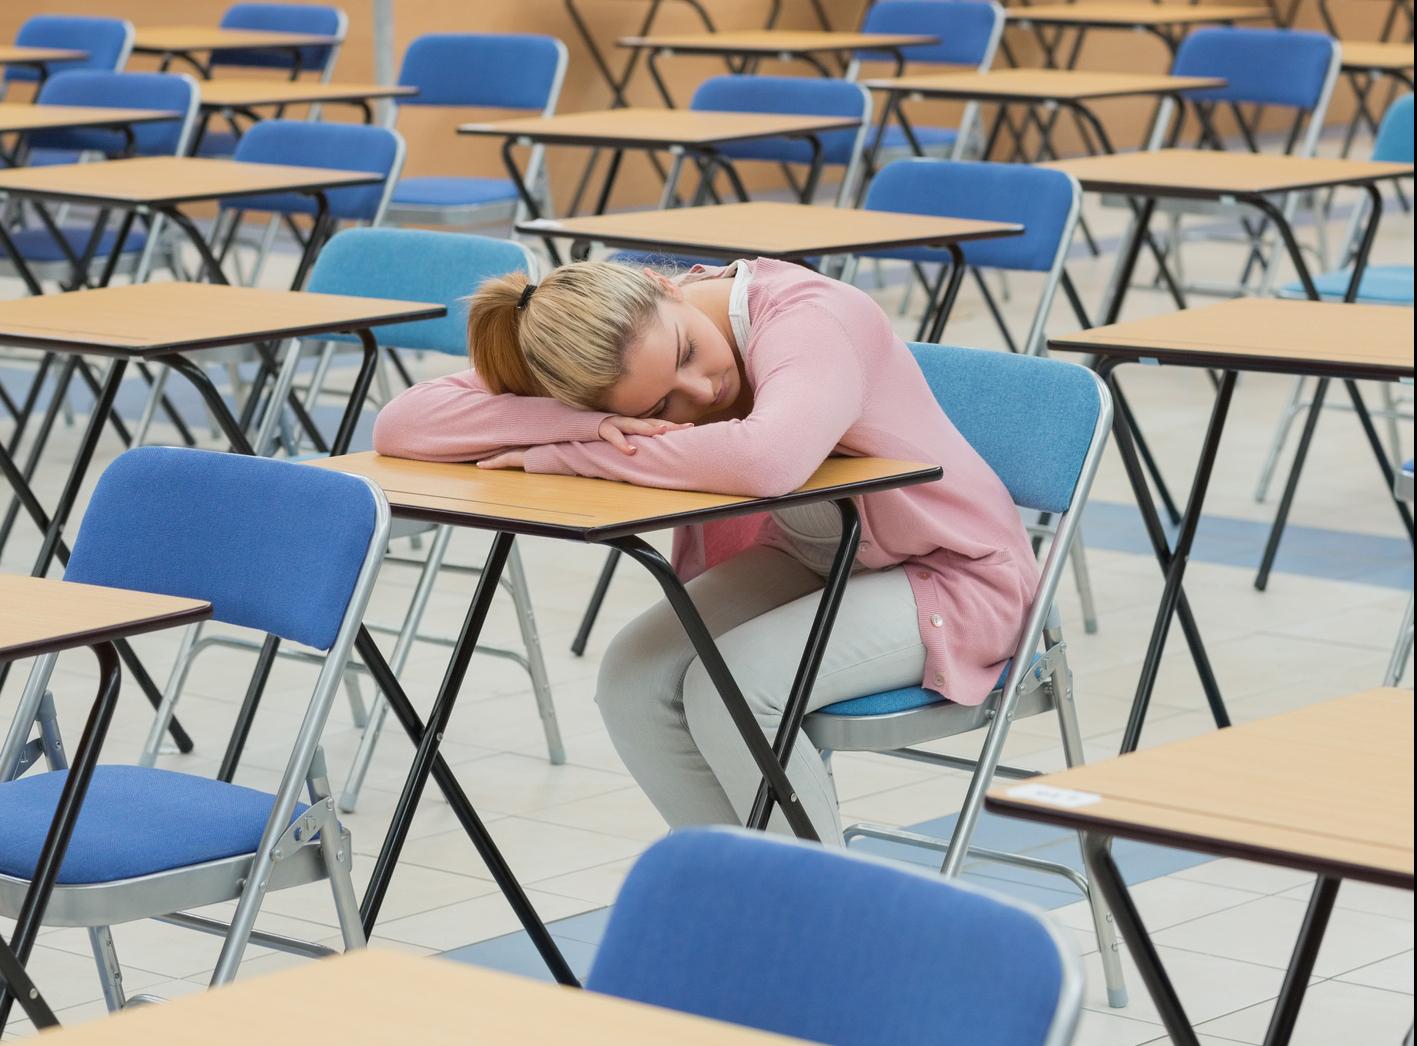 Exams: what are they good for? Girl alone at desk after exam ends